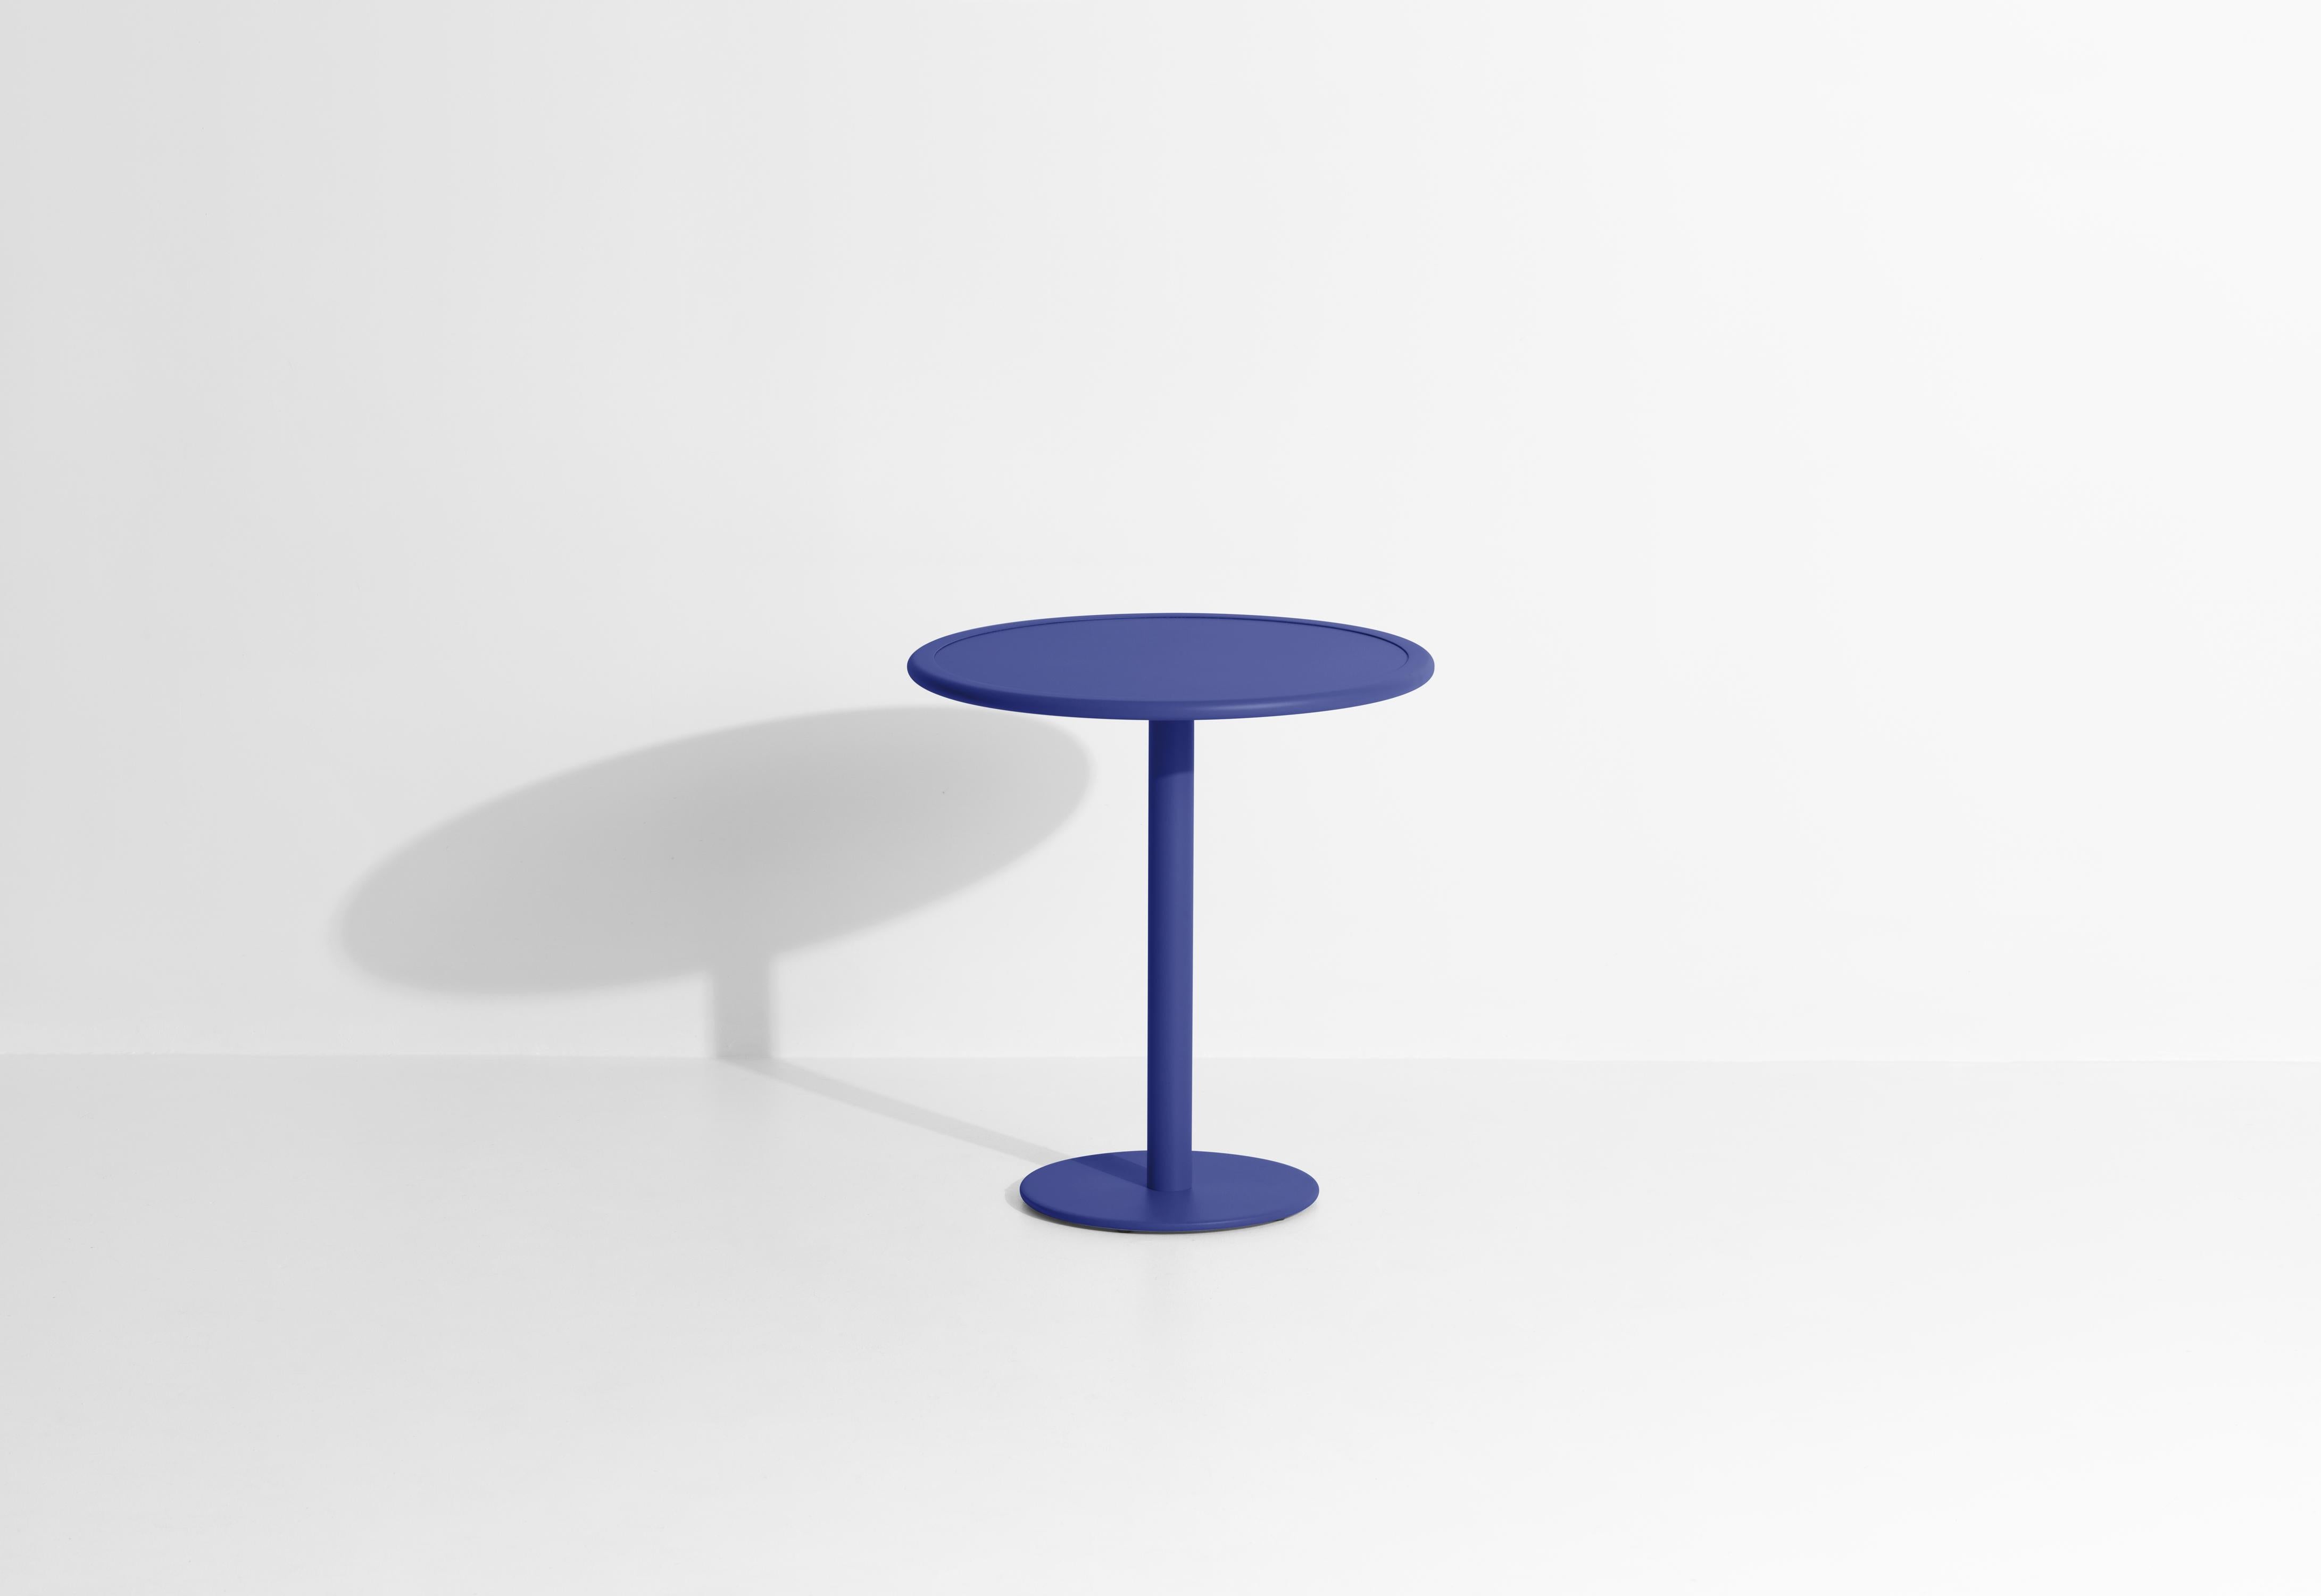 Petite Friture Week-End Bistro Round Dining Table in Blue Aluminium by Studio BrichetZiegler, 2017

The week-end collection is a full range of outdoor furniture, in aluminium grained epoxy paint, matt finish, that includes 18 functions and 8